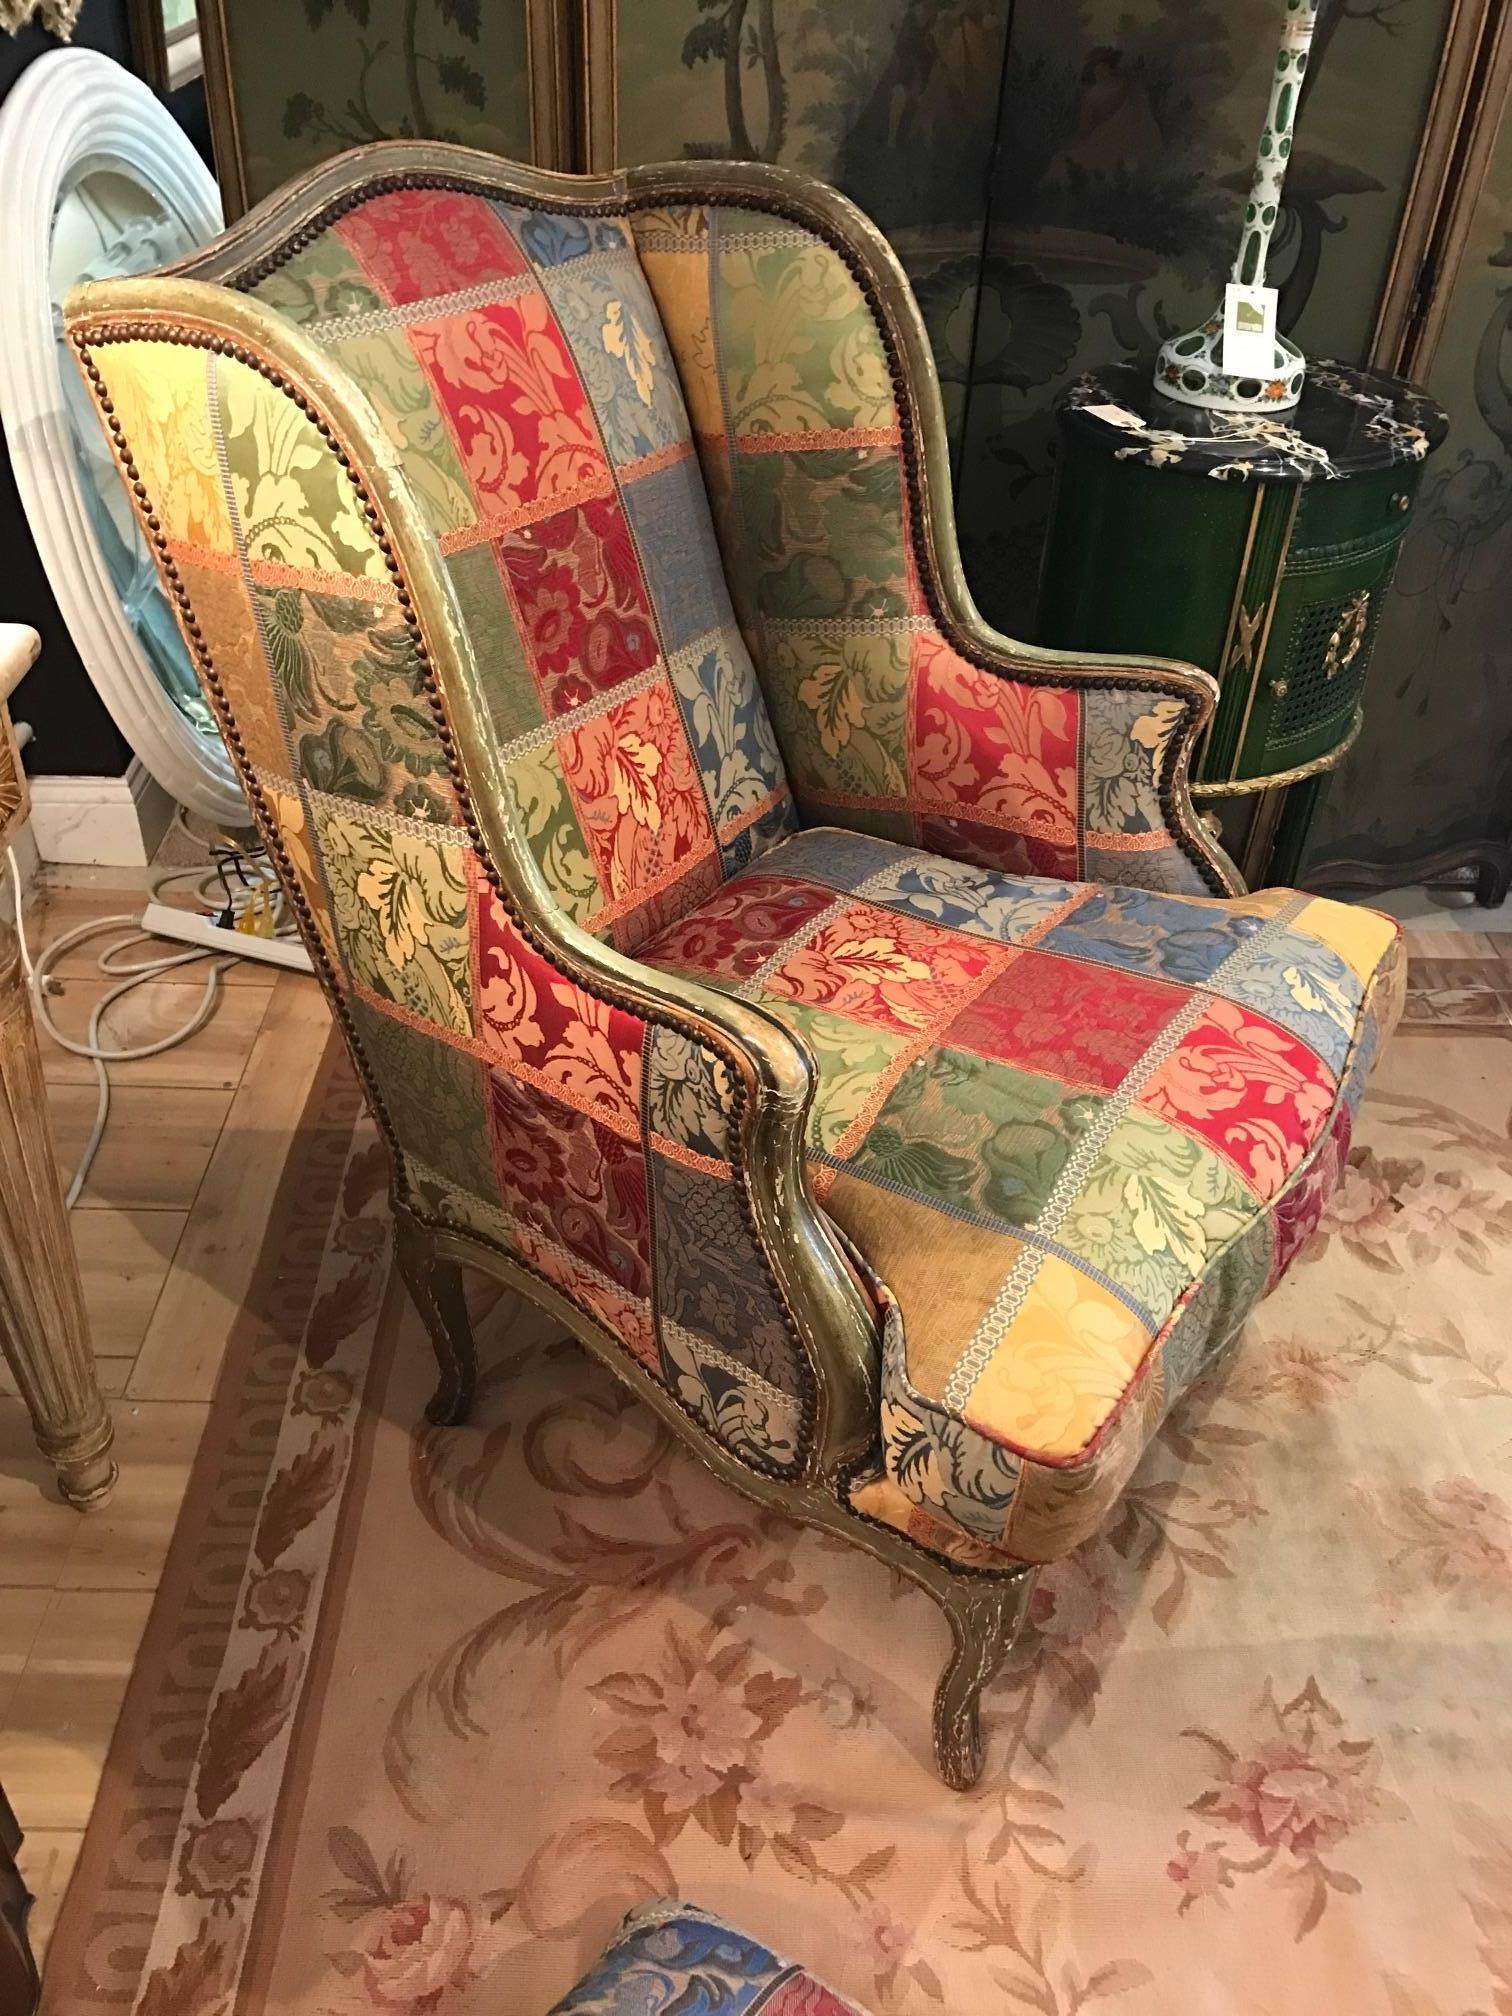 Fabulous comfy winged shepherdess, also known as a confessional armchair, is a resting seat with a deep cushion of feathers, while her ears are made for resting the head. Wonderful distressed green painted frame and checkerboard jacquard upholstery.